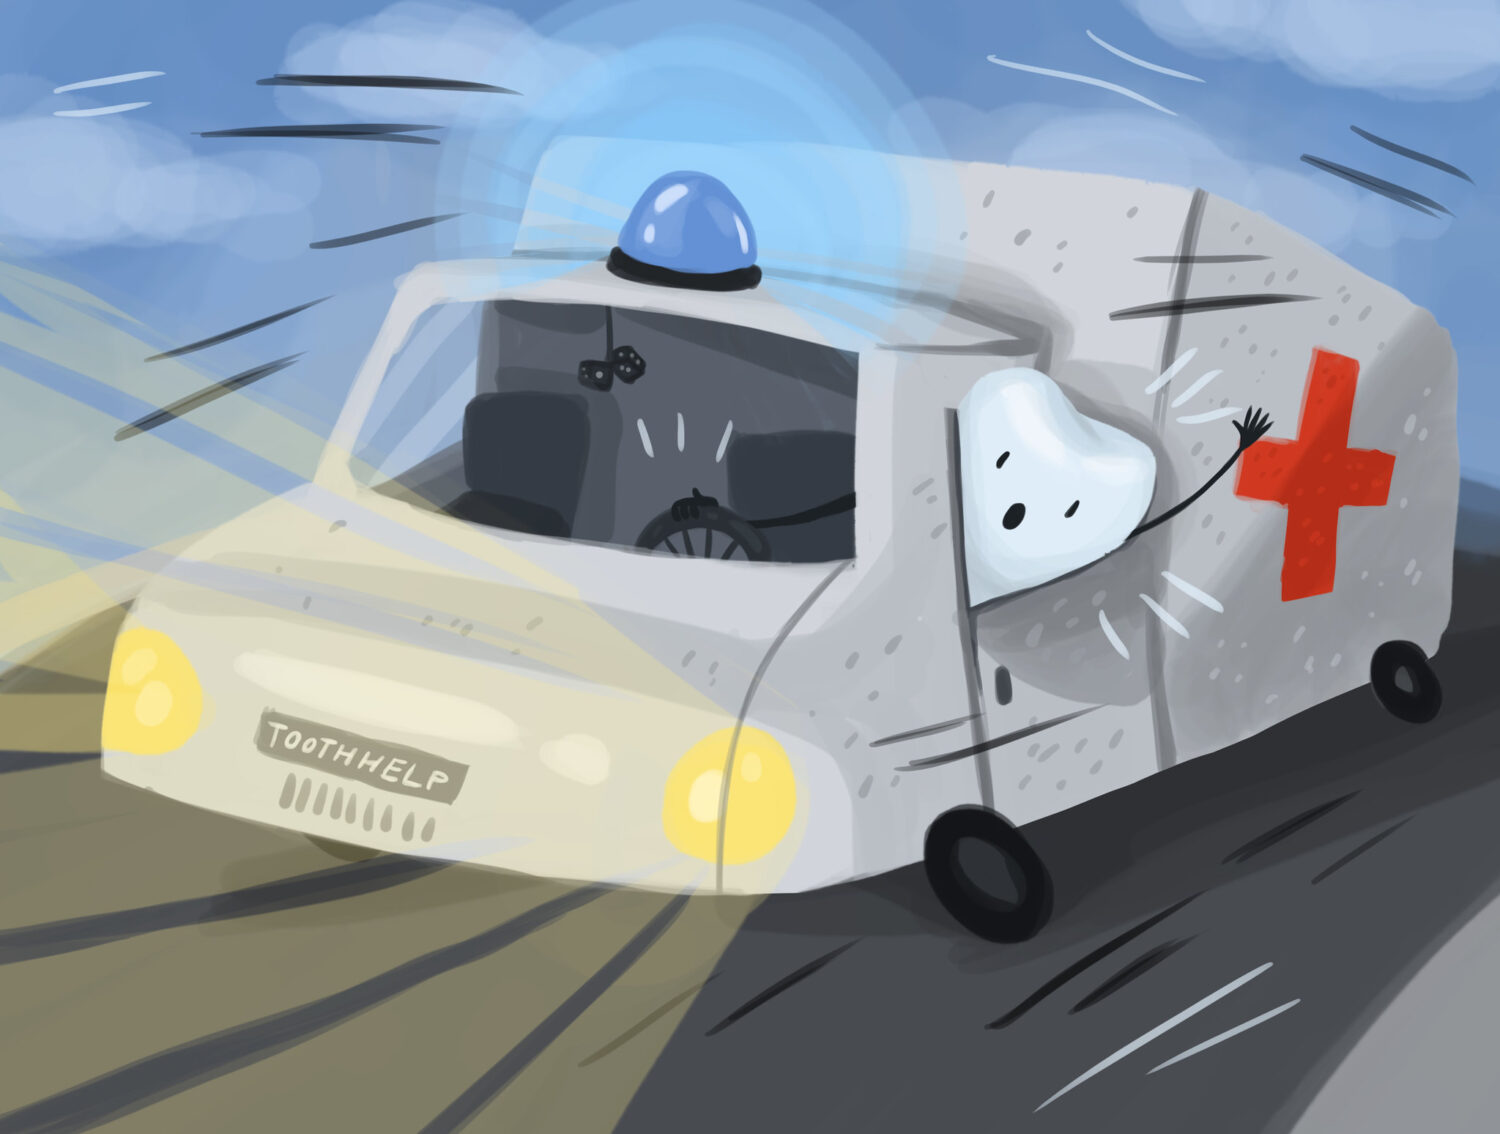 Illustration of a tooth driving an ambulance to give help during a dental emergency